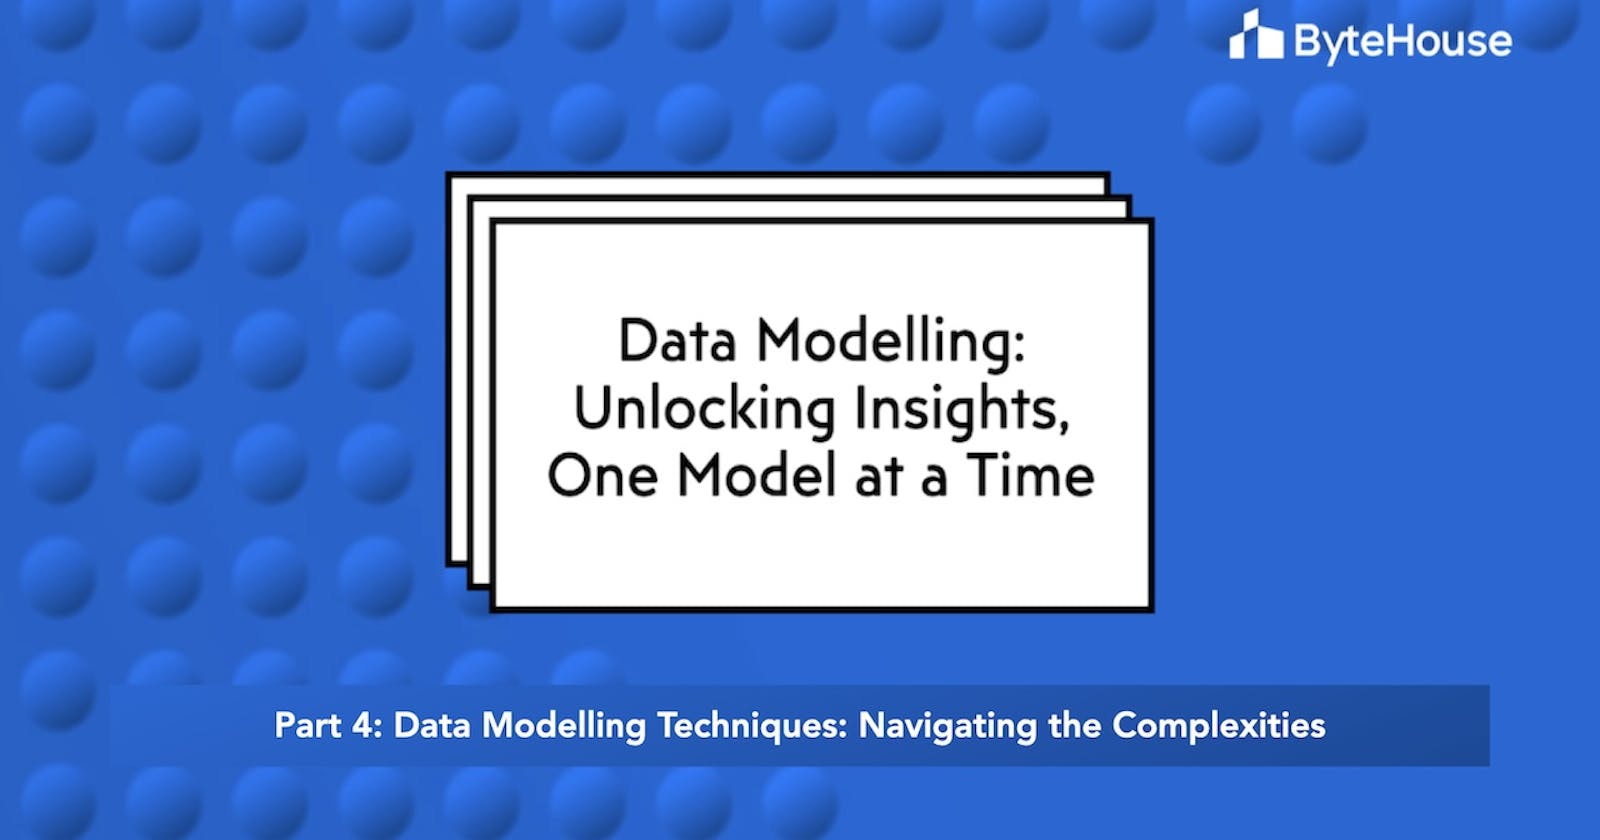 Data modelling techniques: Navigating the complexities